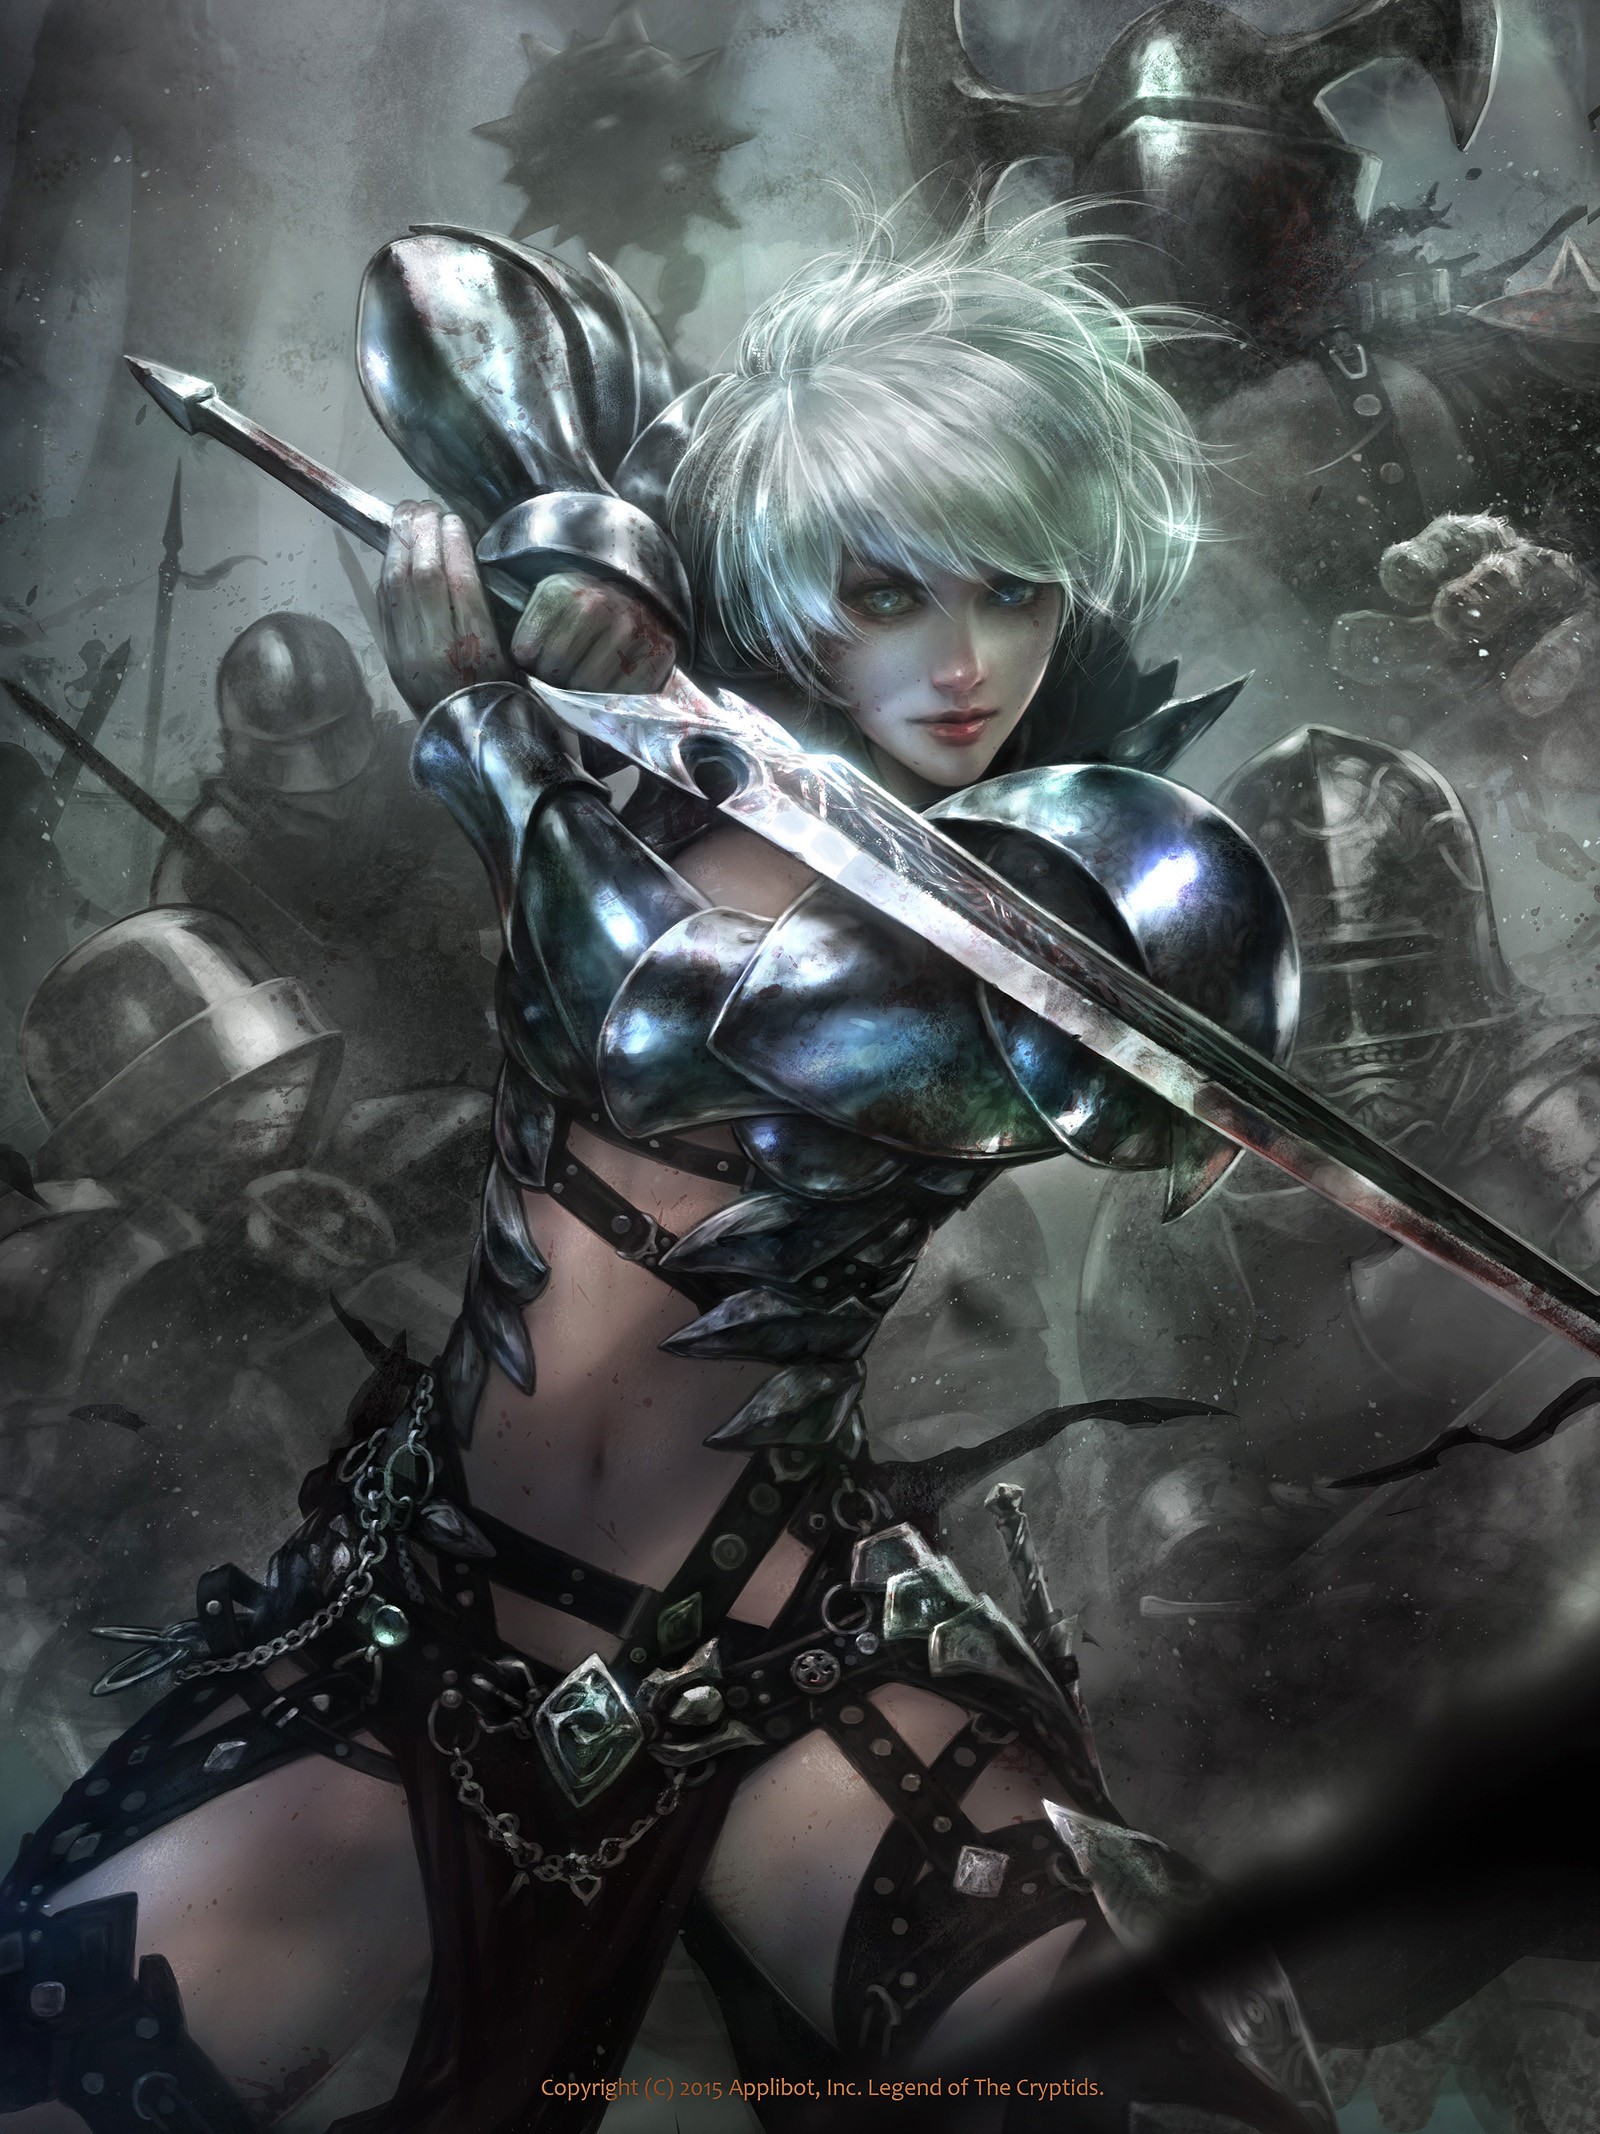 General 1600x2134 fantasy art fantasy girl 2015 (Year) sword women fantasy armor armor women with swords weapon belly Legend of the Cryptids